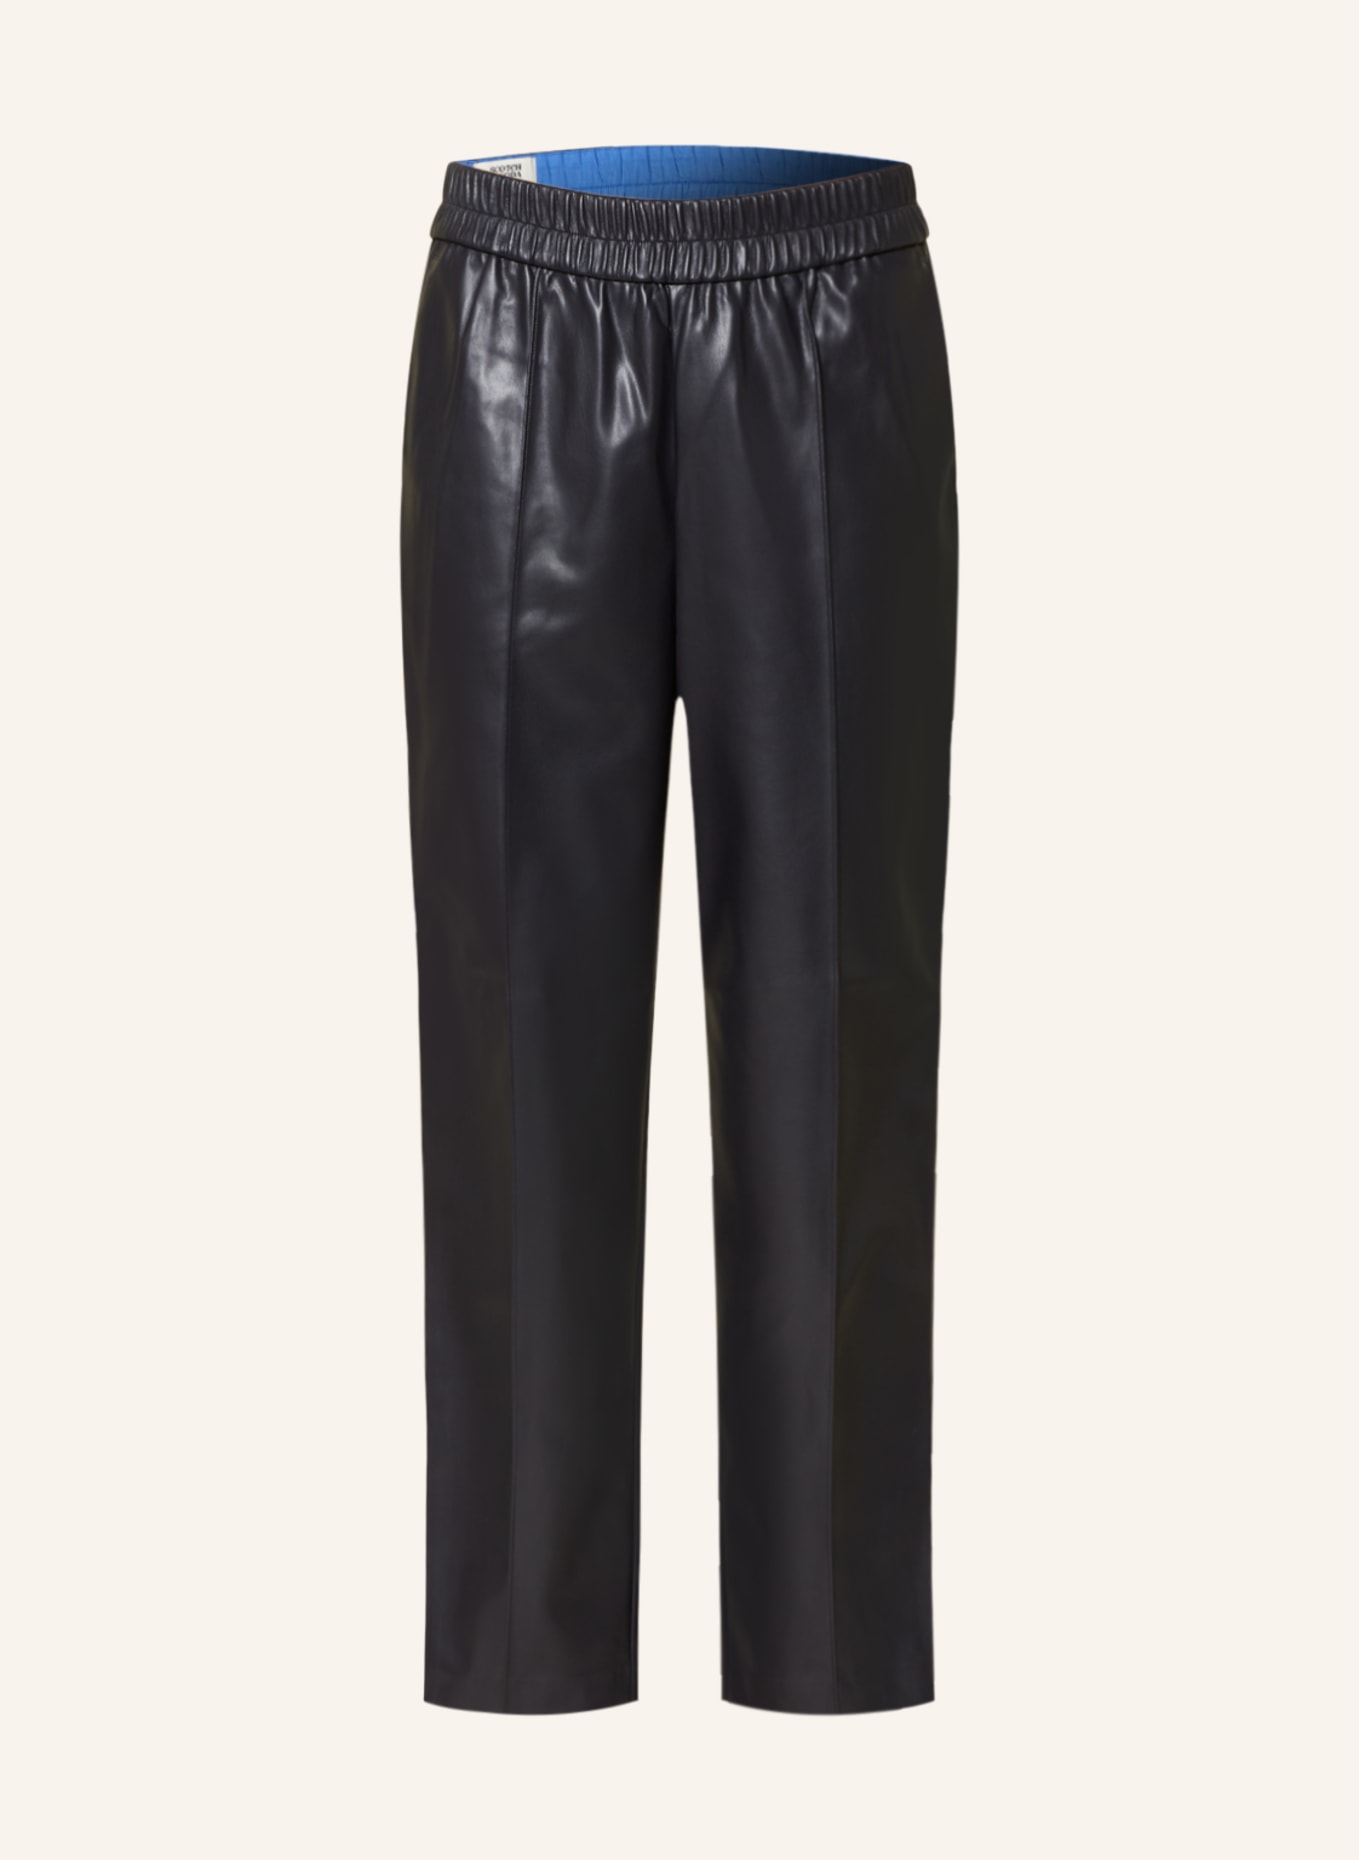 SCOTCH & SODA 7/8 trousers in leather look, Color: DARK BLUE (Image 1)